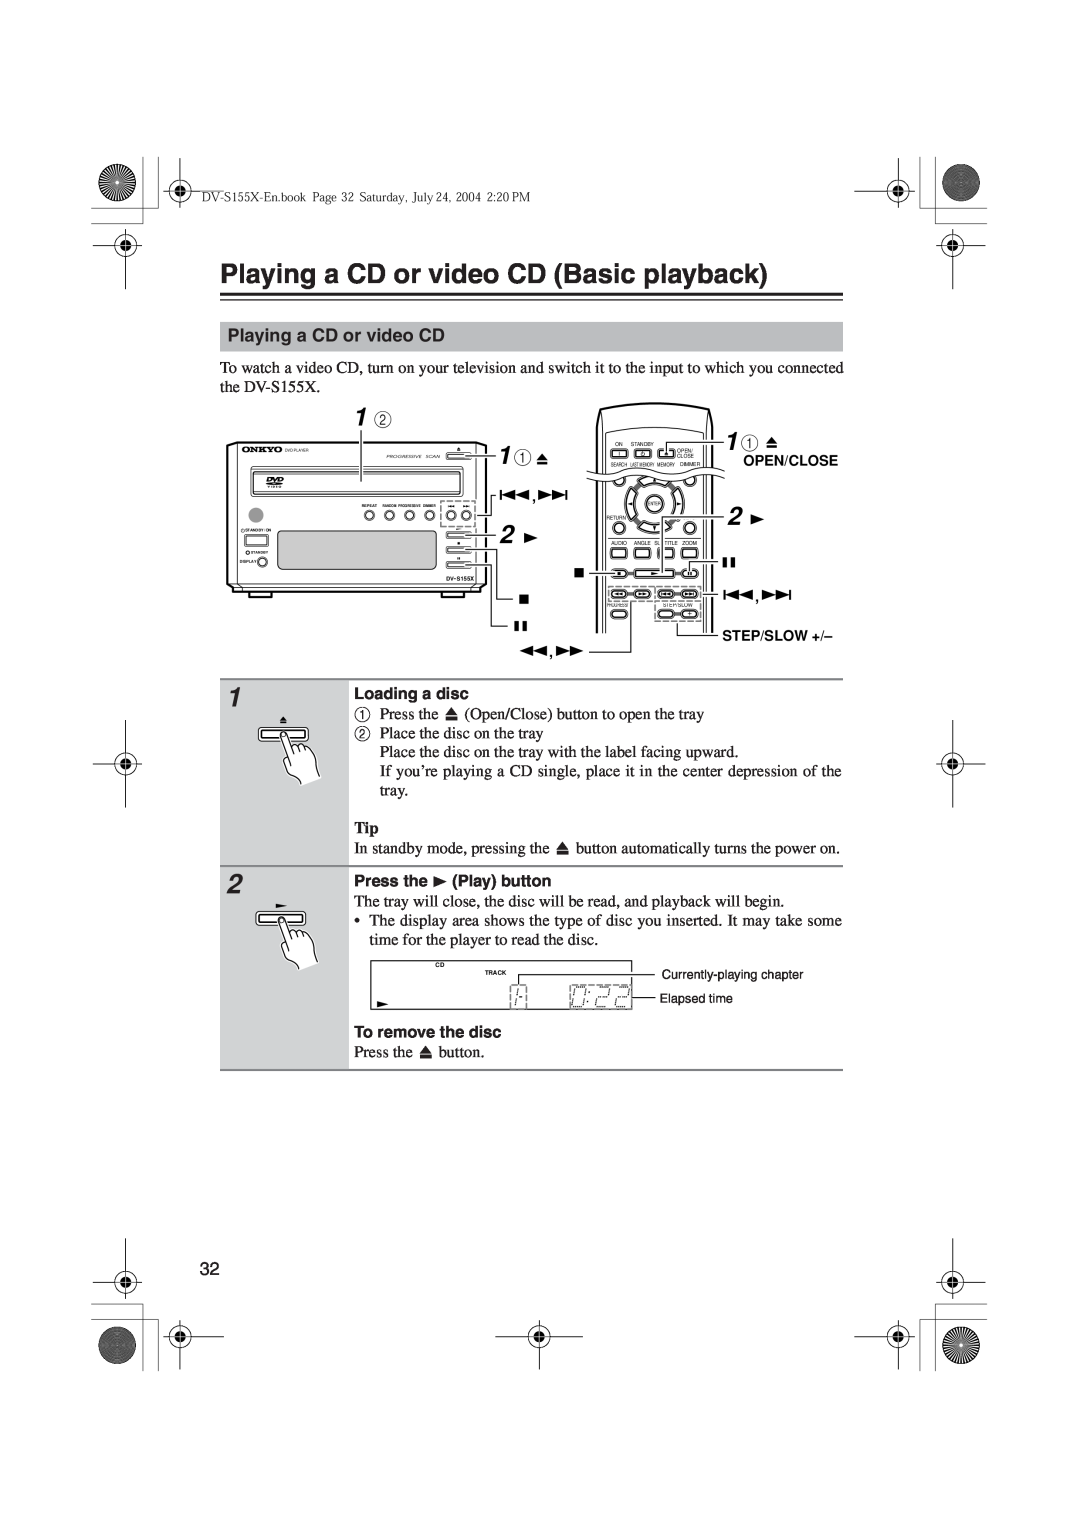 Onkyo DV-S155X, PR-155X Playing a CD or video CD Basic playback, Loading a disc, To remove the disc, Press the Play button 